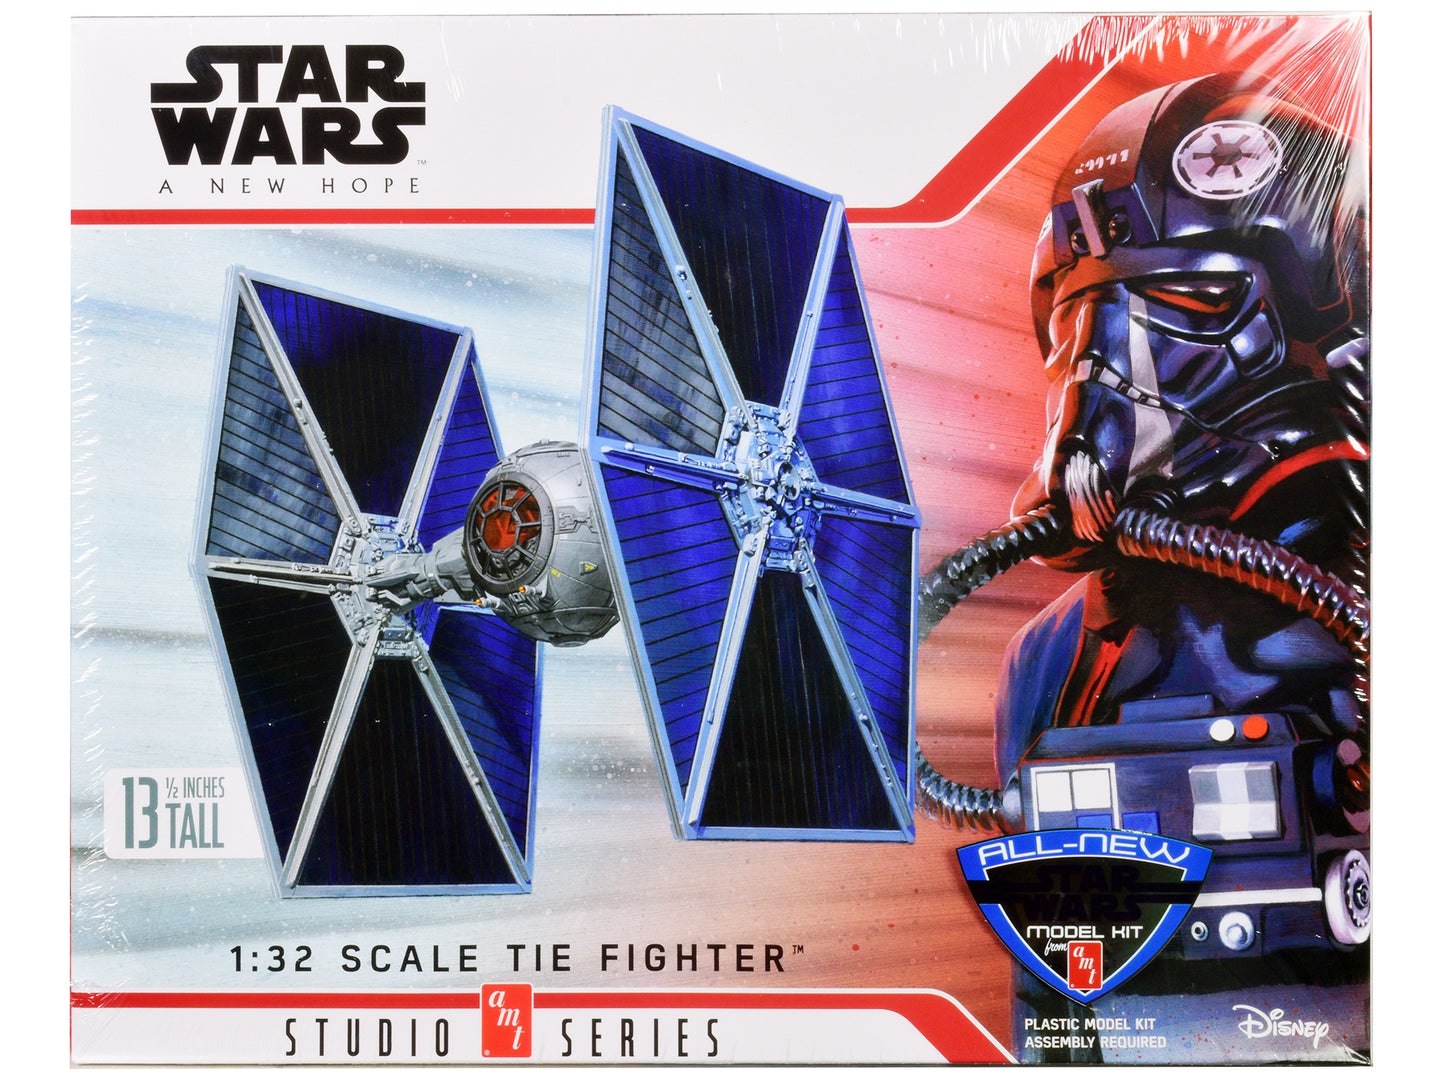 Skill 2 Model Kit Tie Fighter "Star Wars: Episode IV - A New Hope" (1977) Movie 1/32 Scale Model by AMT